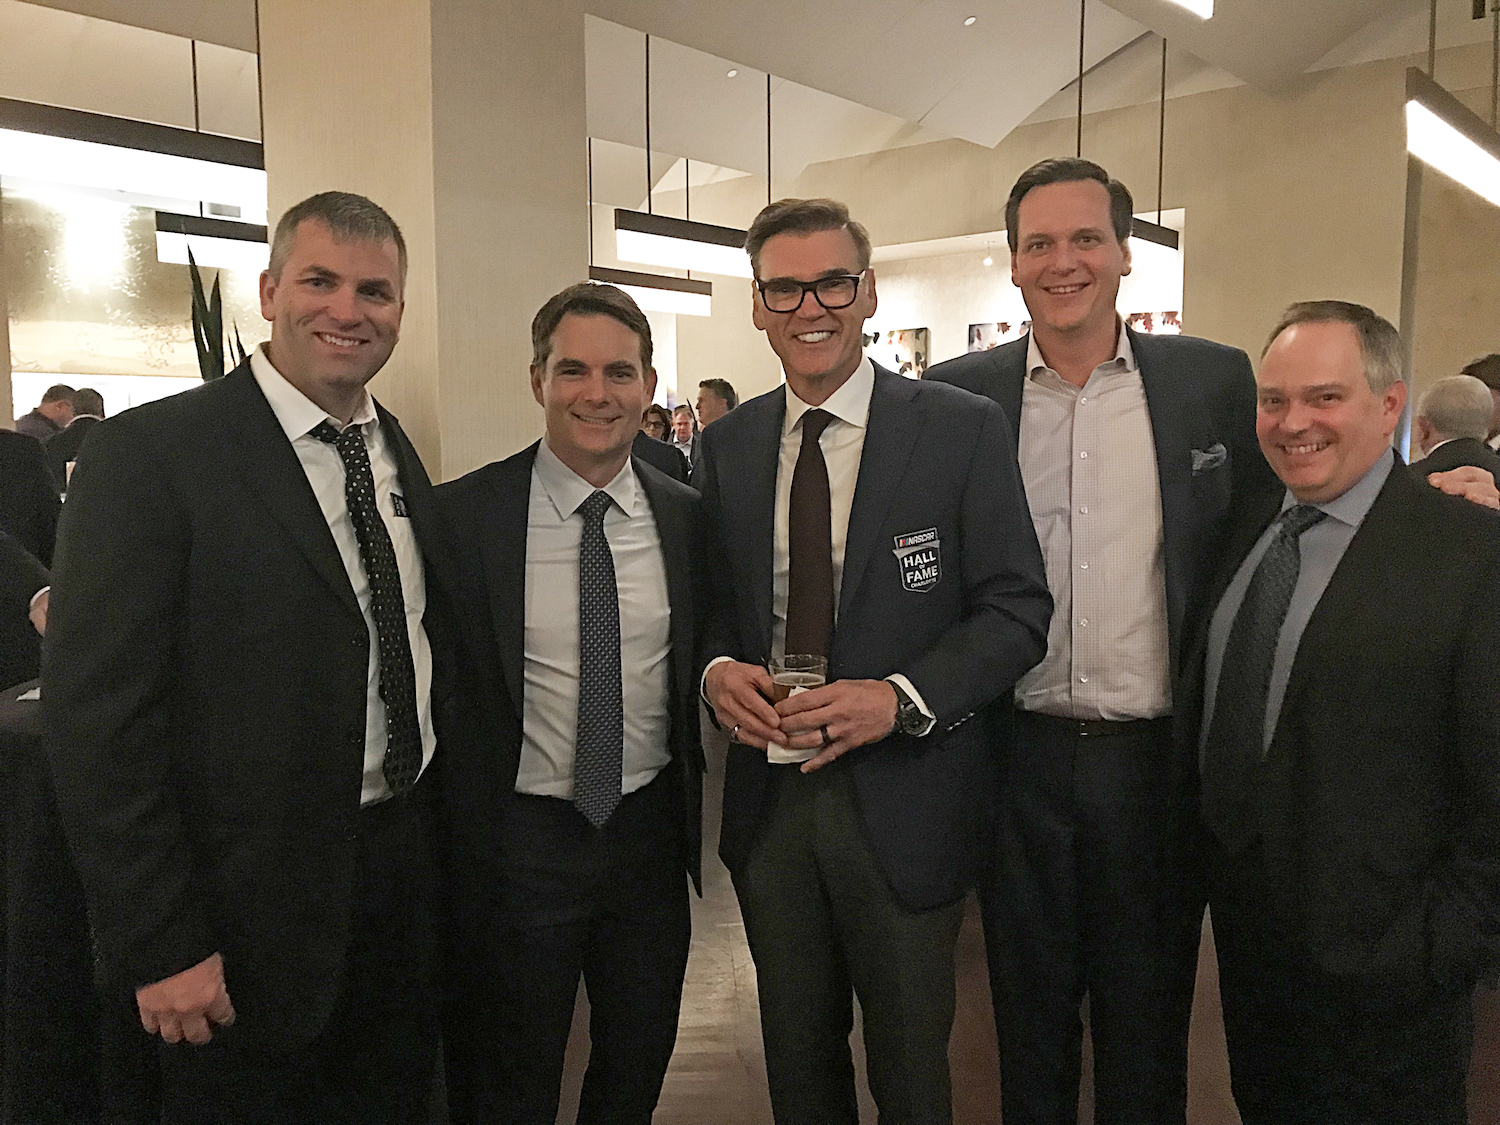 Patrick Donahue, Jeff Gordon, me, Steve Letarte, and Brian Whitesell. It was great to have so many members of the No. 24 team at my Hall of Fame induction in 2018. Ray Evernham Enterprises Archives